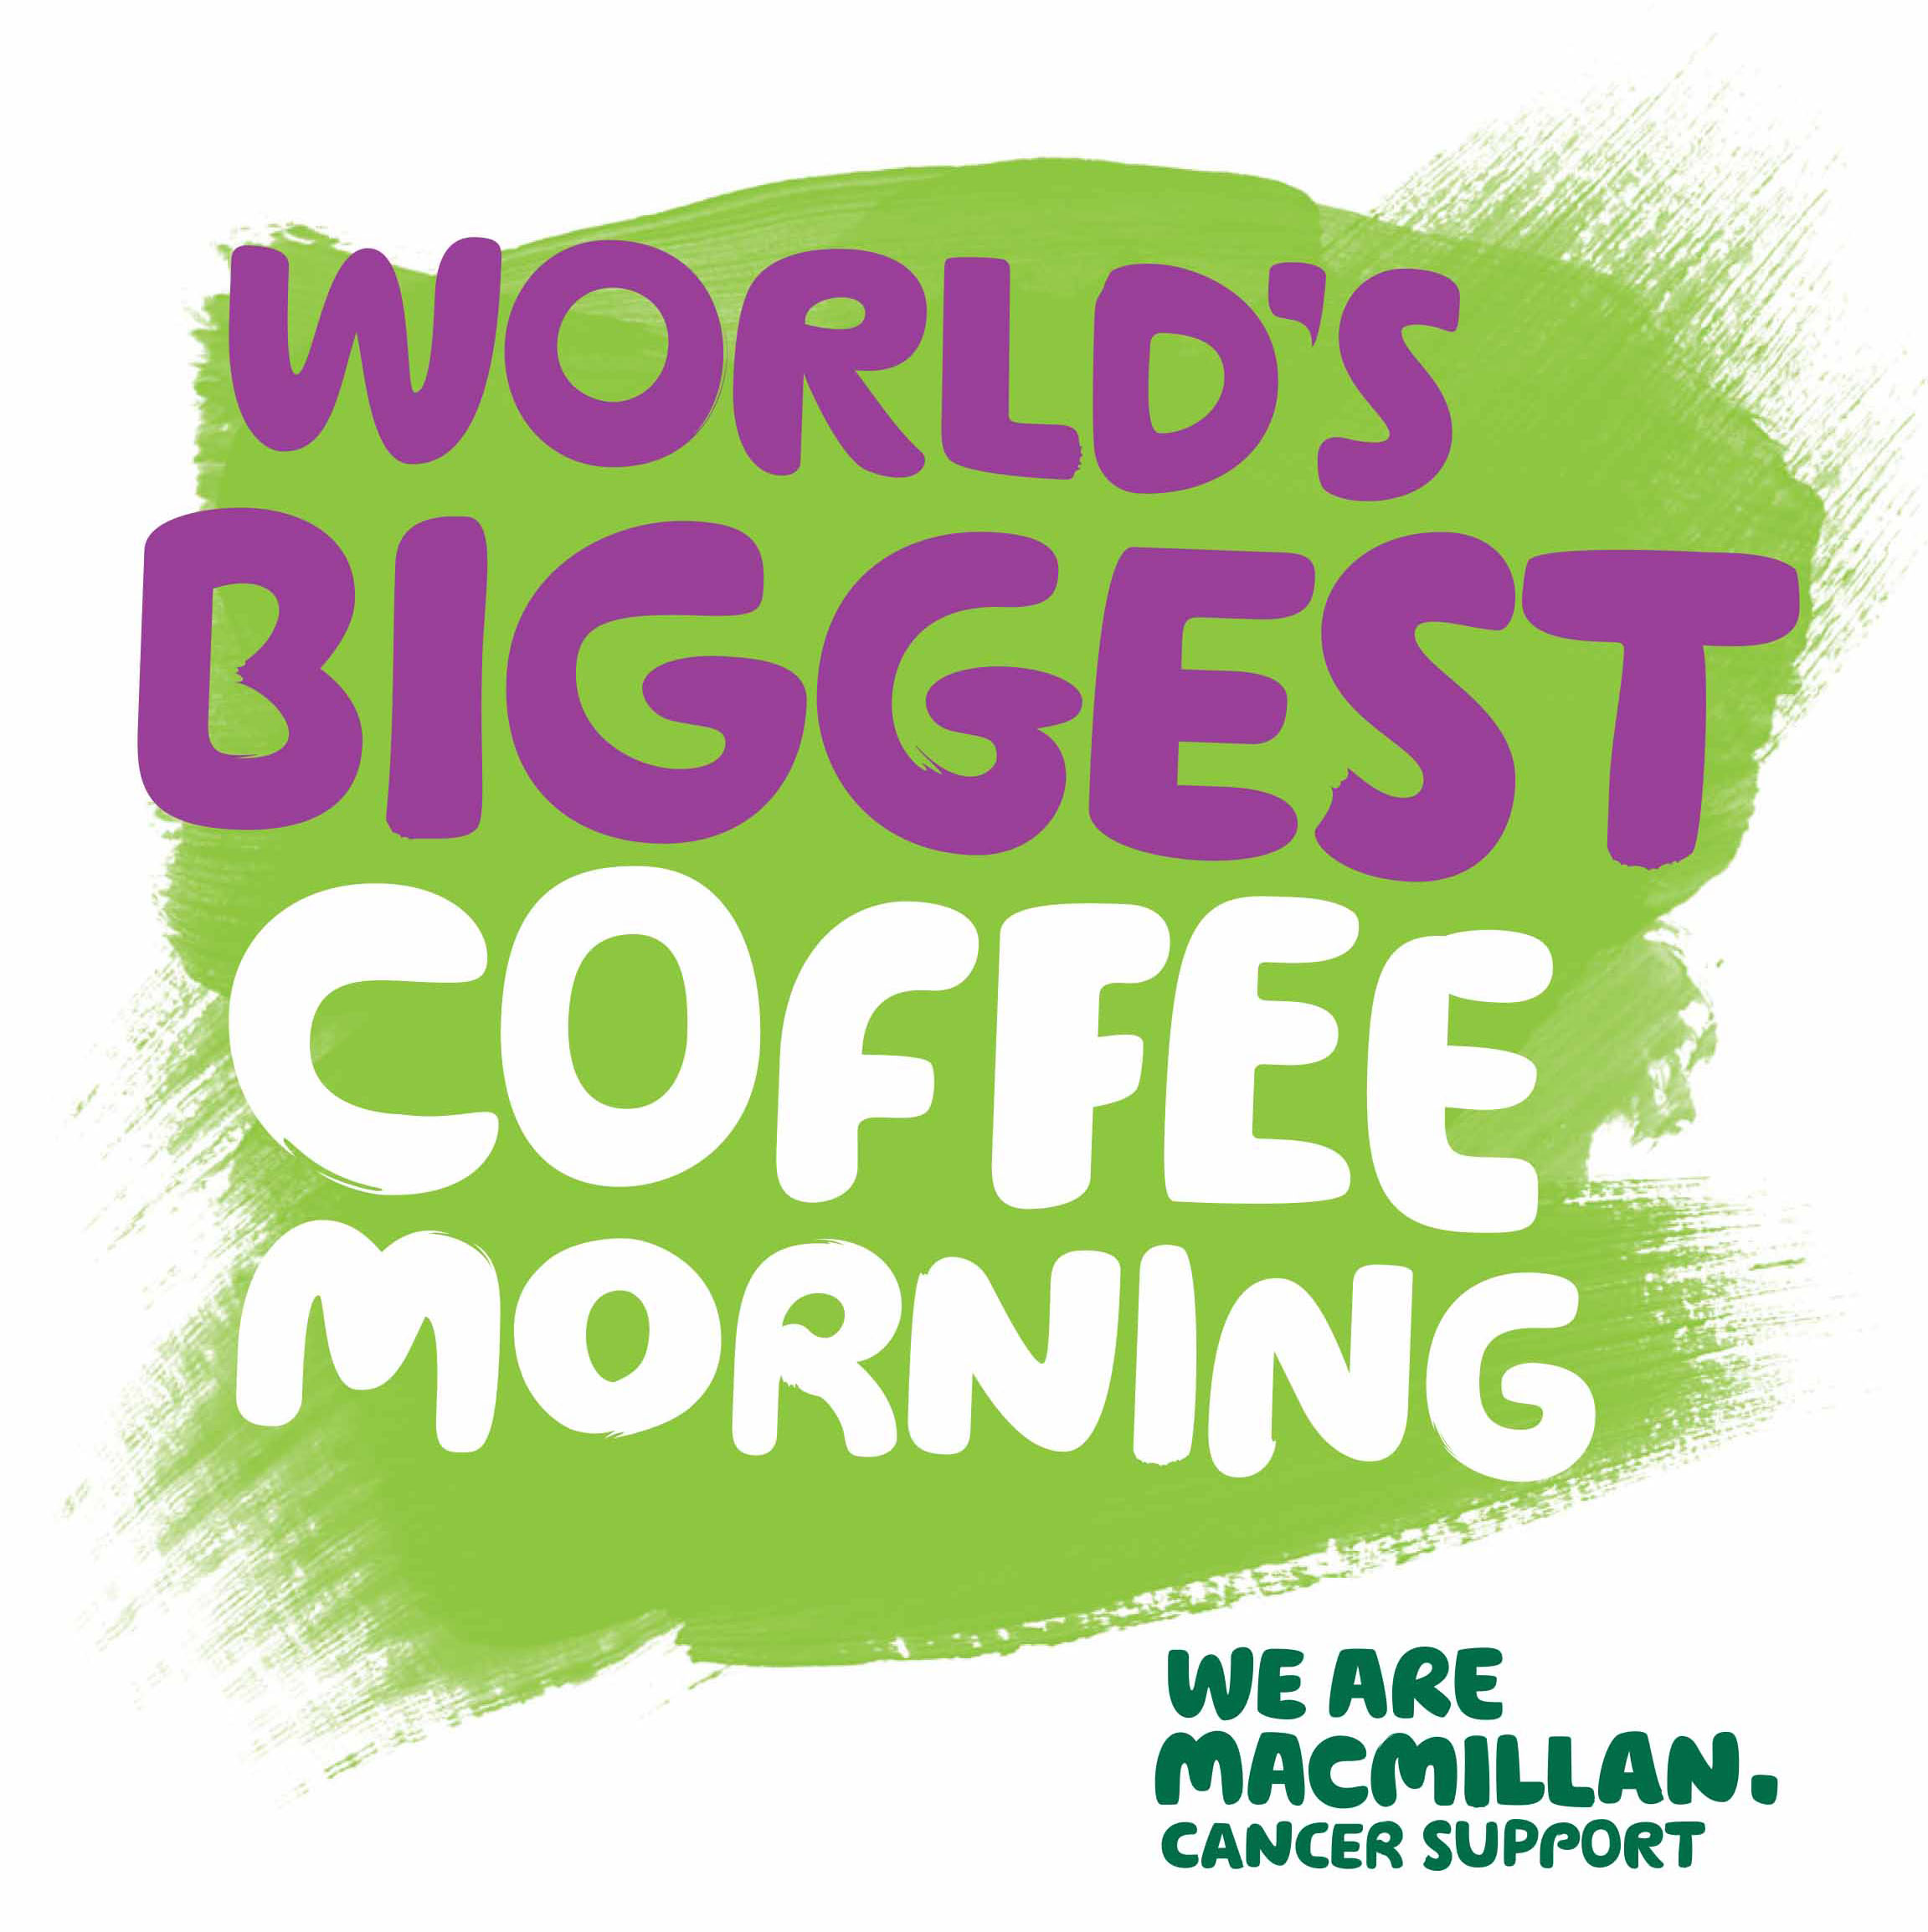 macmillan coffee morning advert with the text 'world's biggest coffee morning'